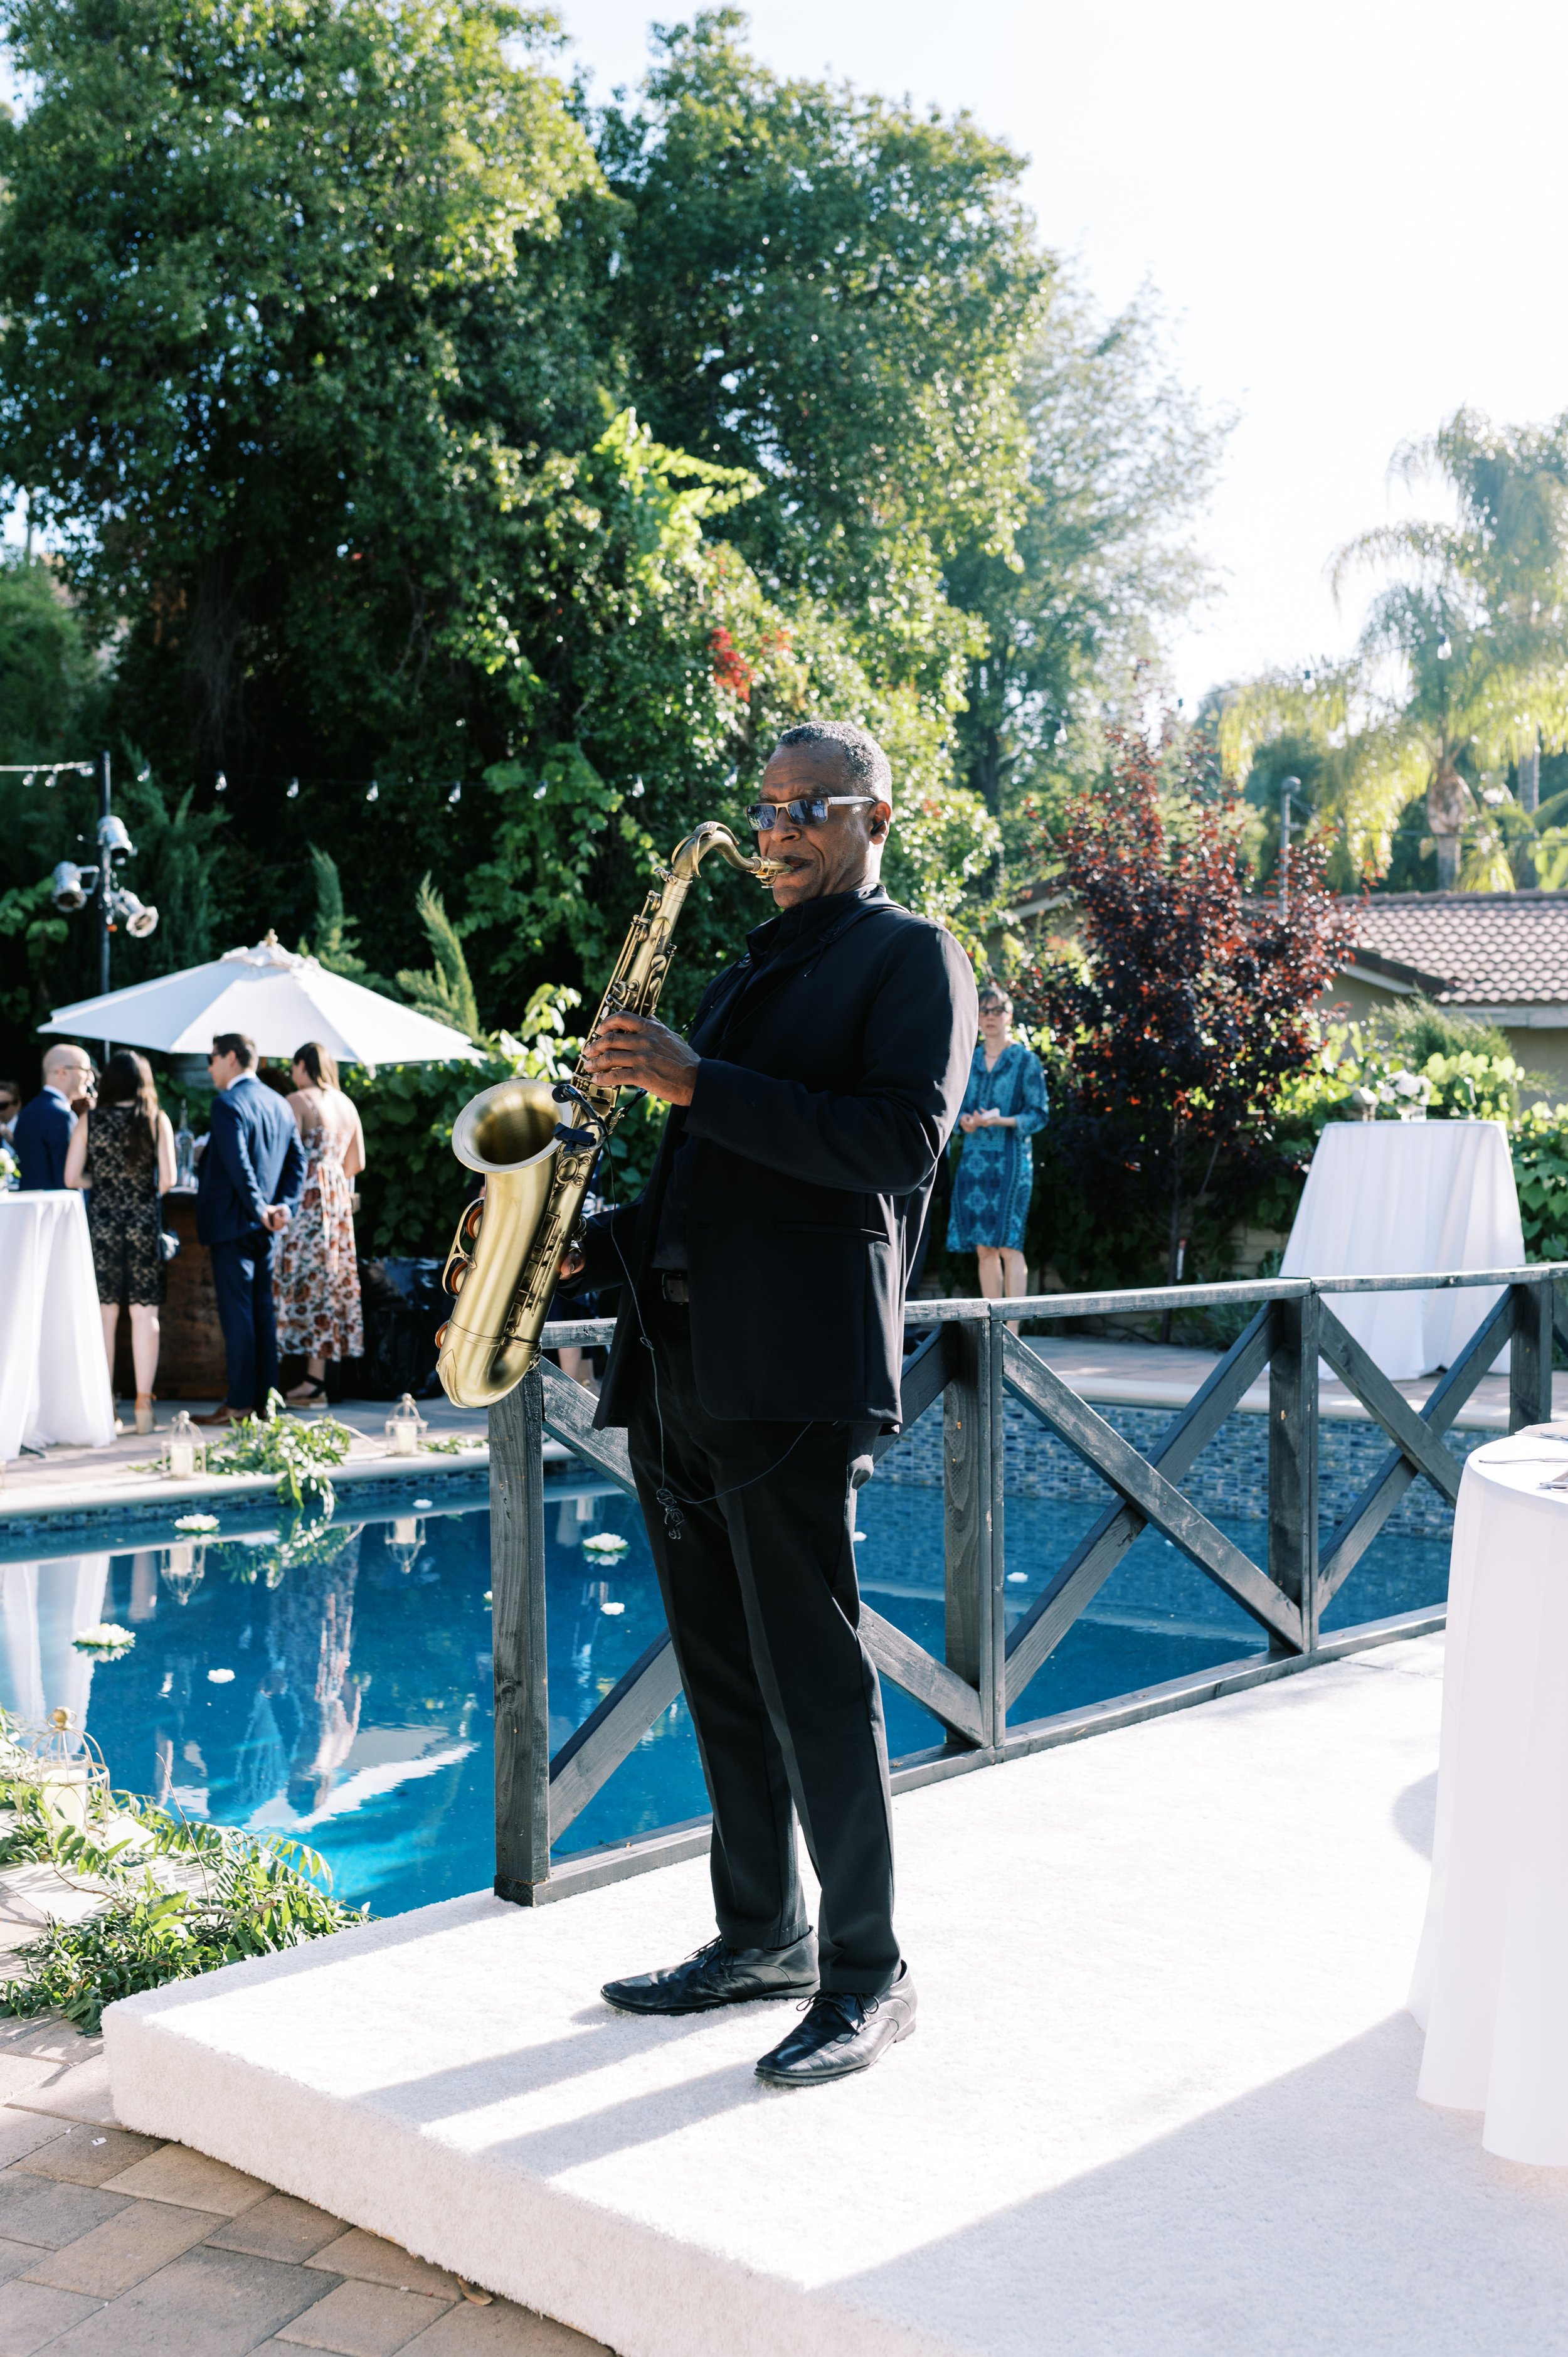 Backyard wedding cocktail hour with a live saxaphone player in Los Angeles.